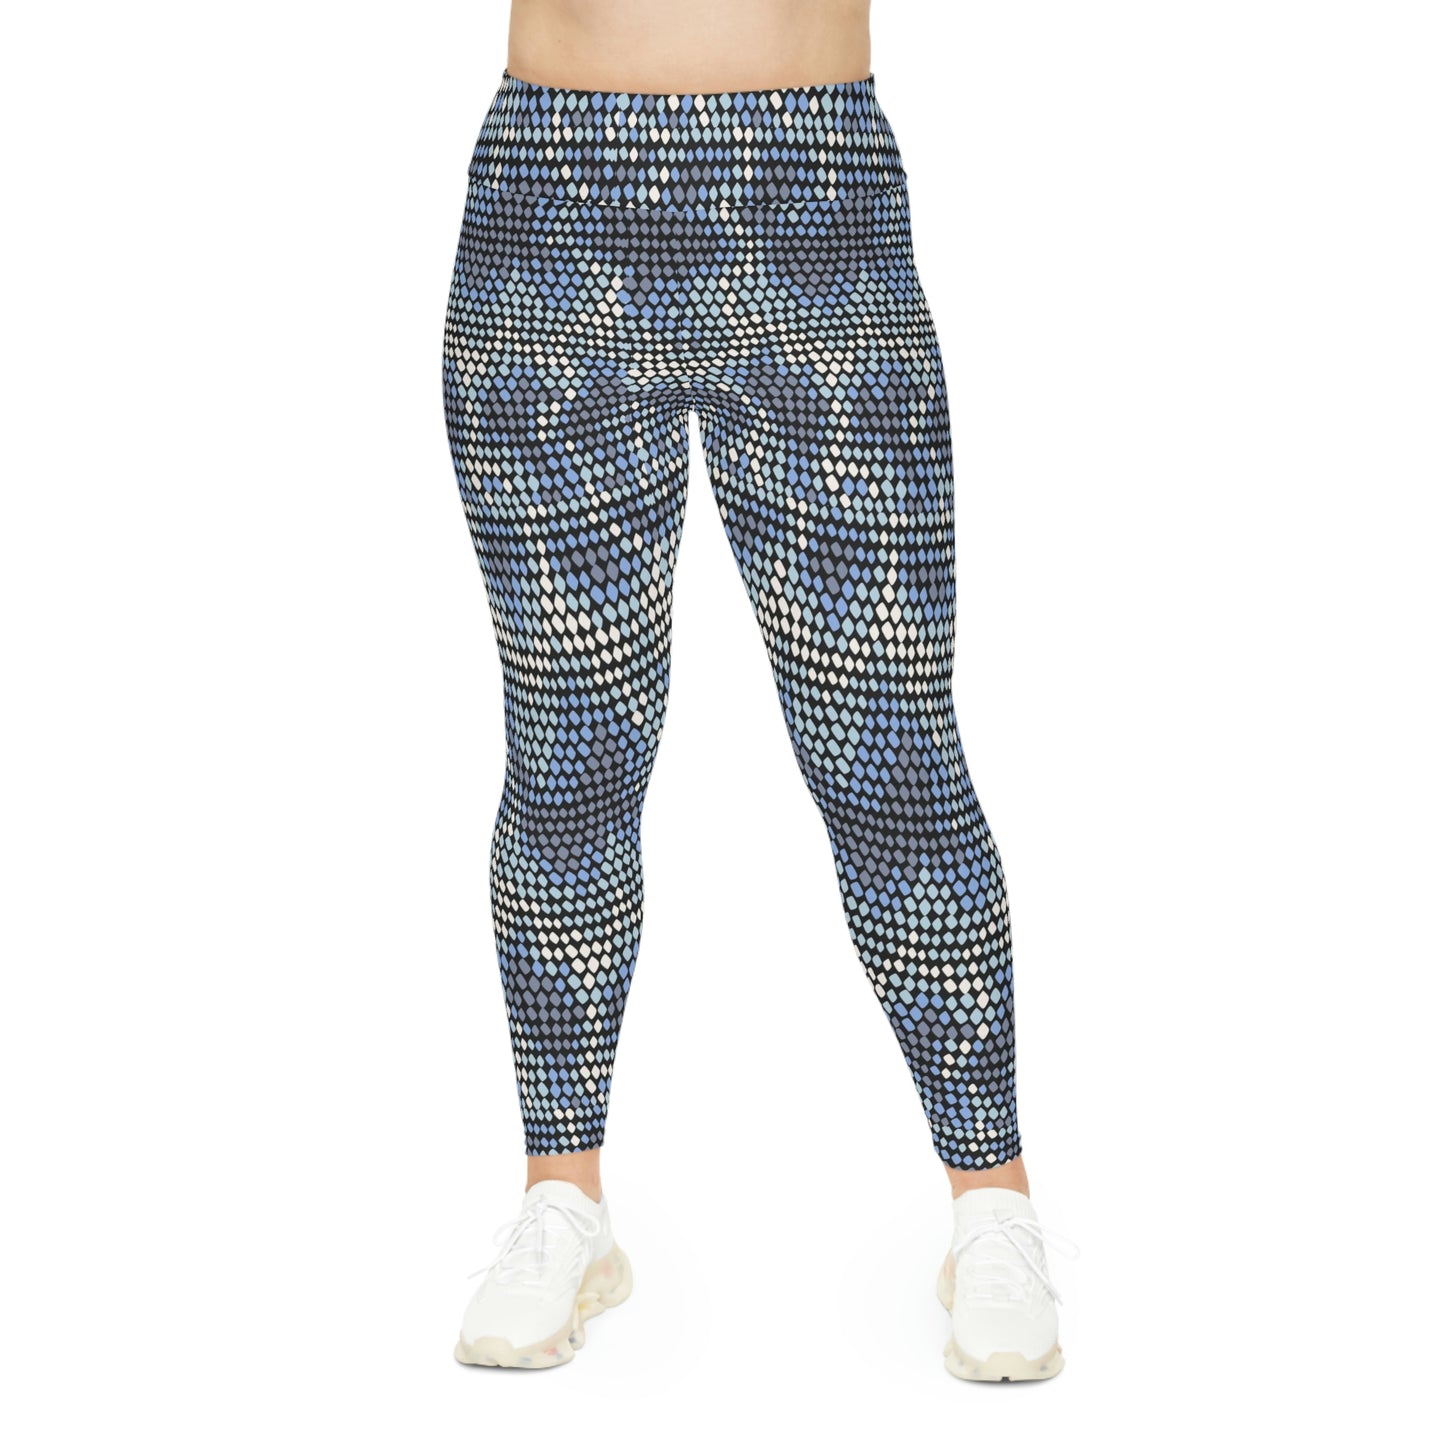 Snake animal kingdom, Safari Plus Size Leggings, One of a Kind Gift - Unique Workout Activewear tights for Wife, Girlfriend, Mothers Day Gift